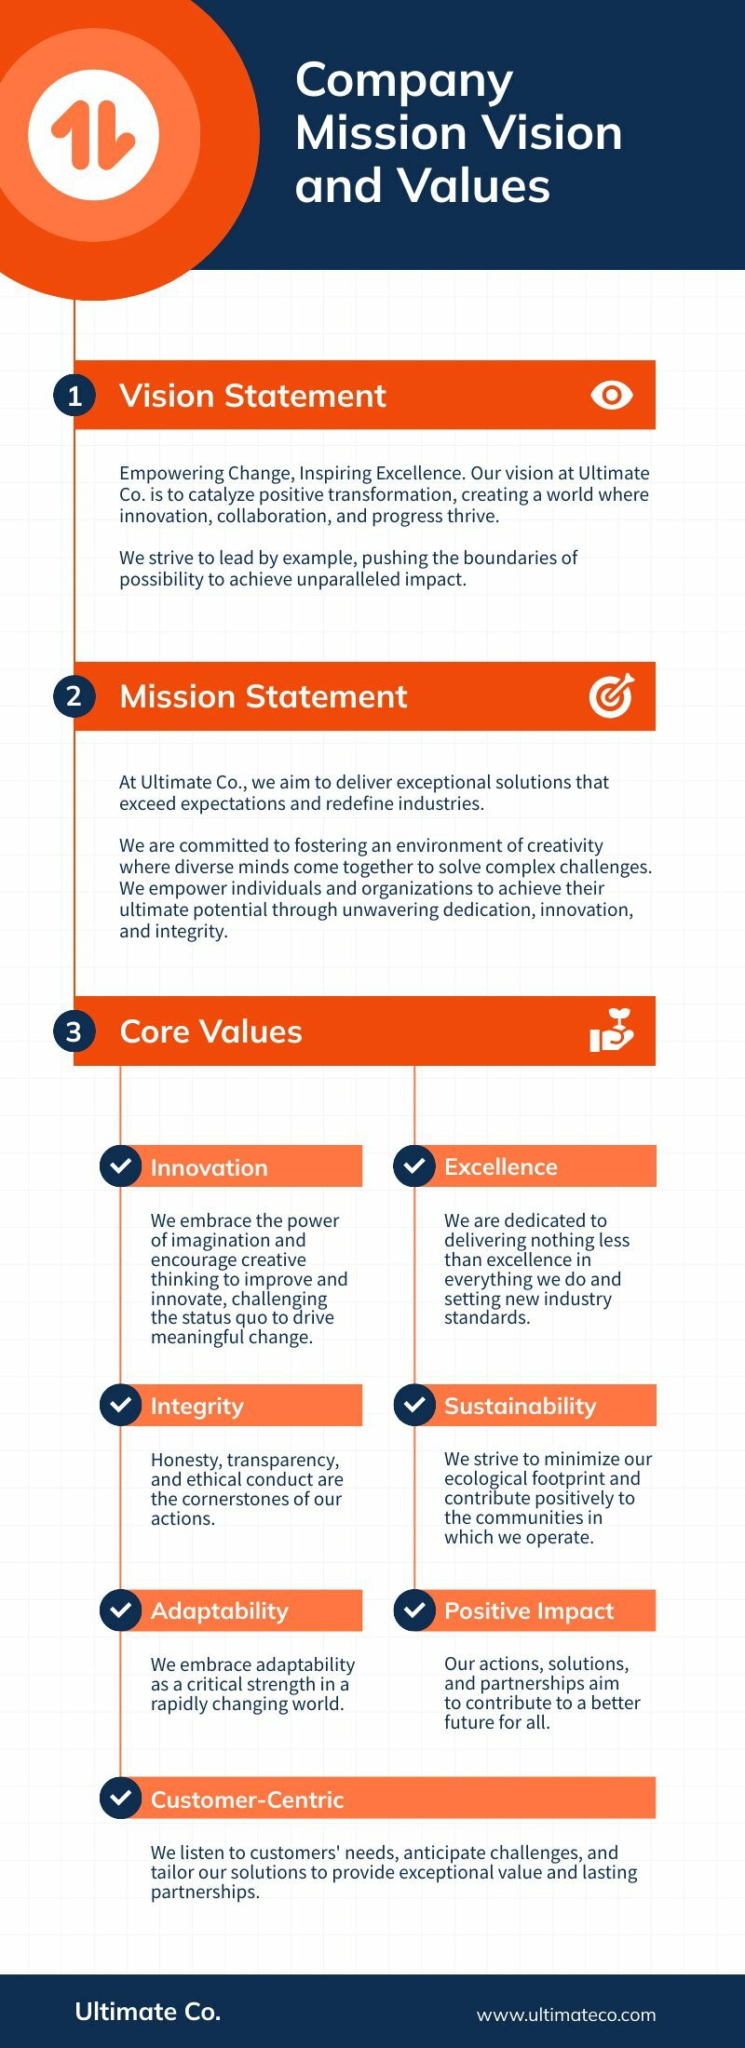 Mission Vision and Core Values